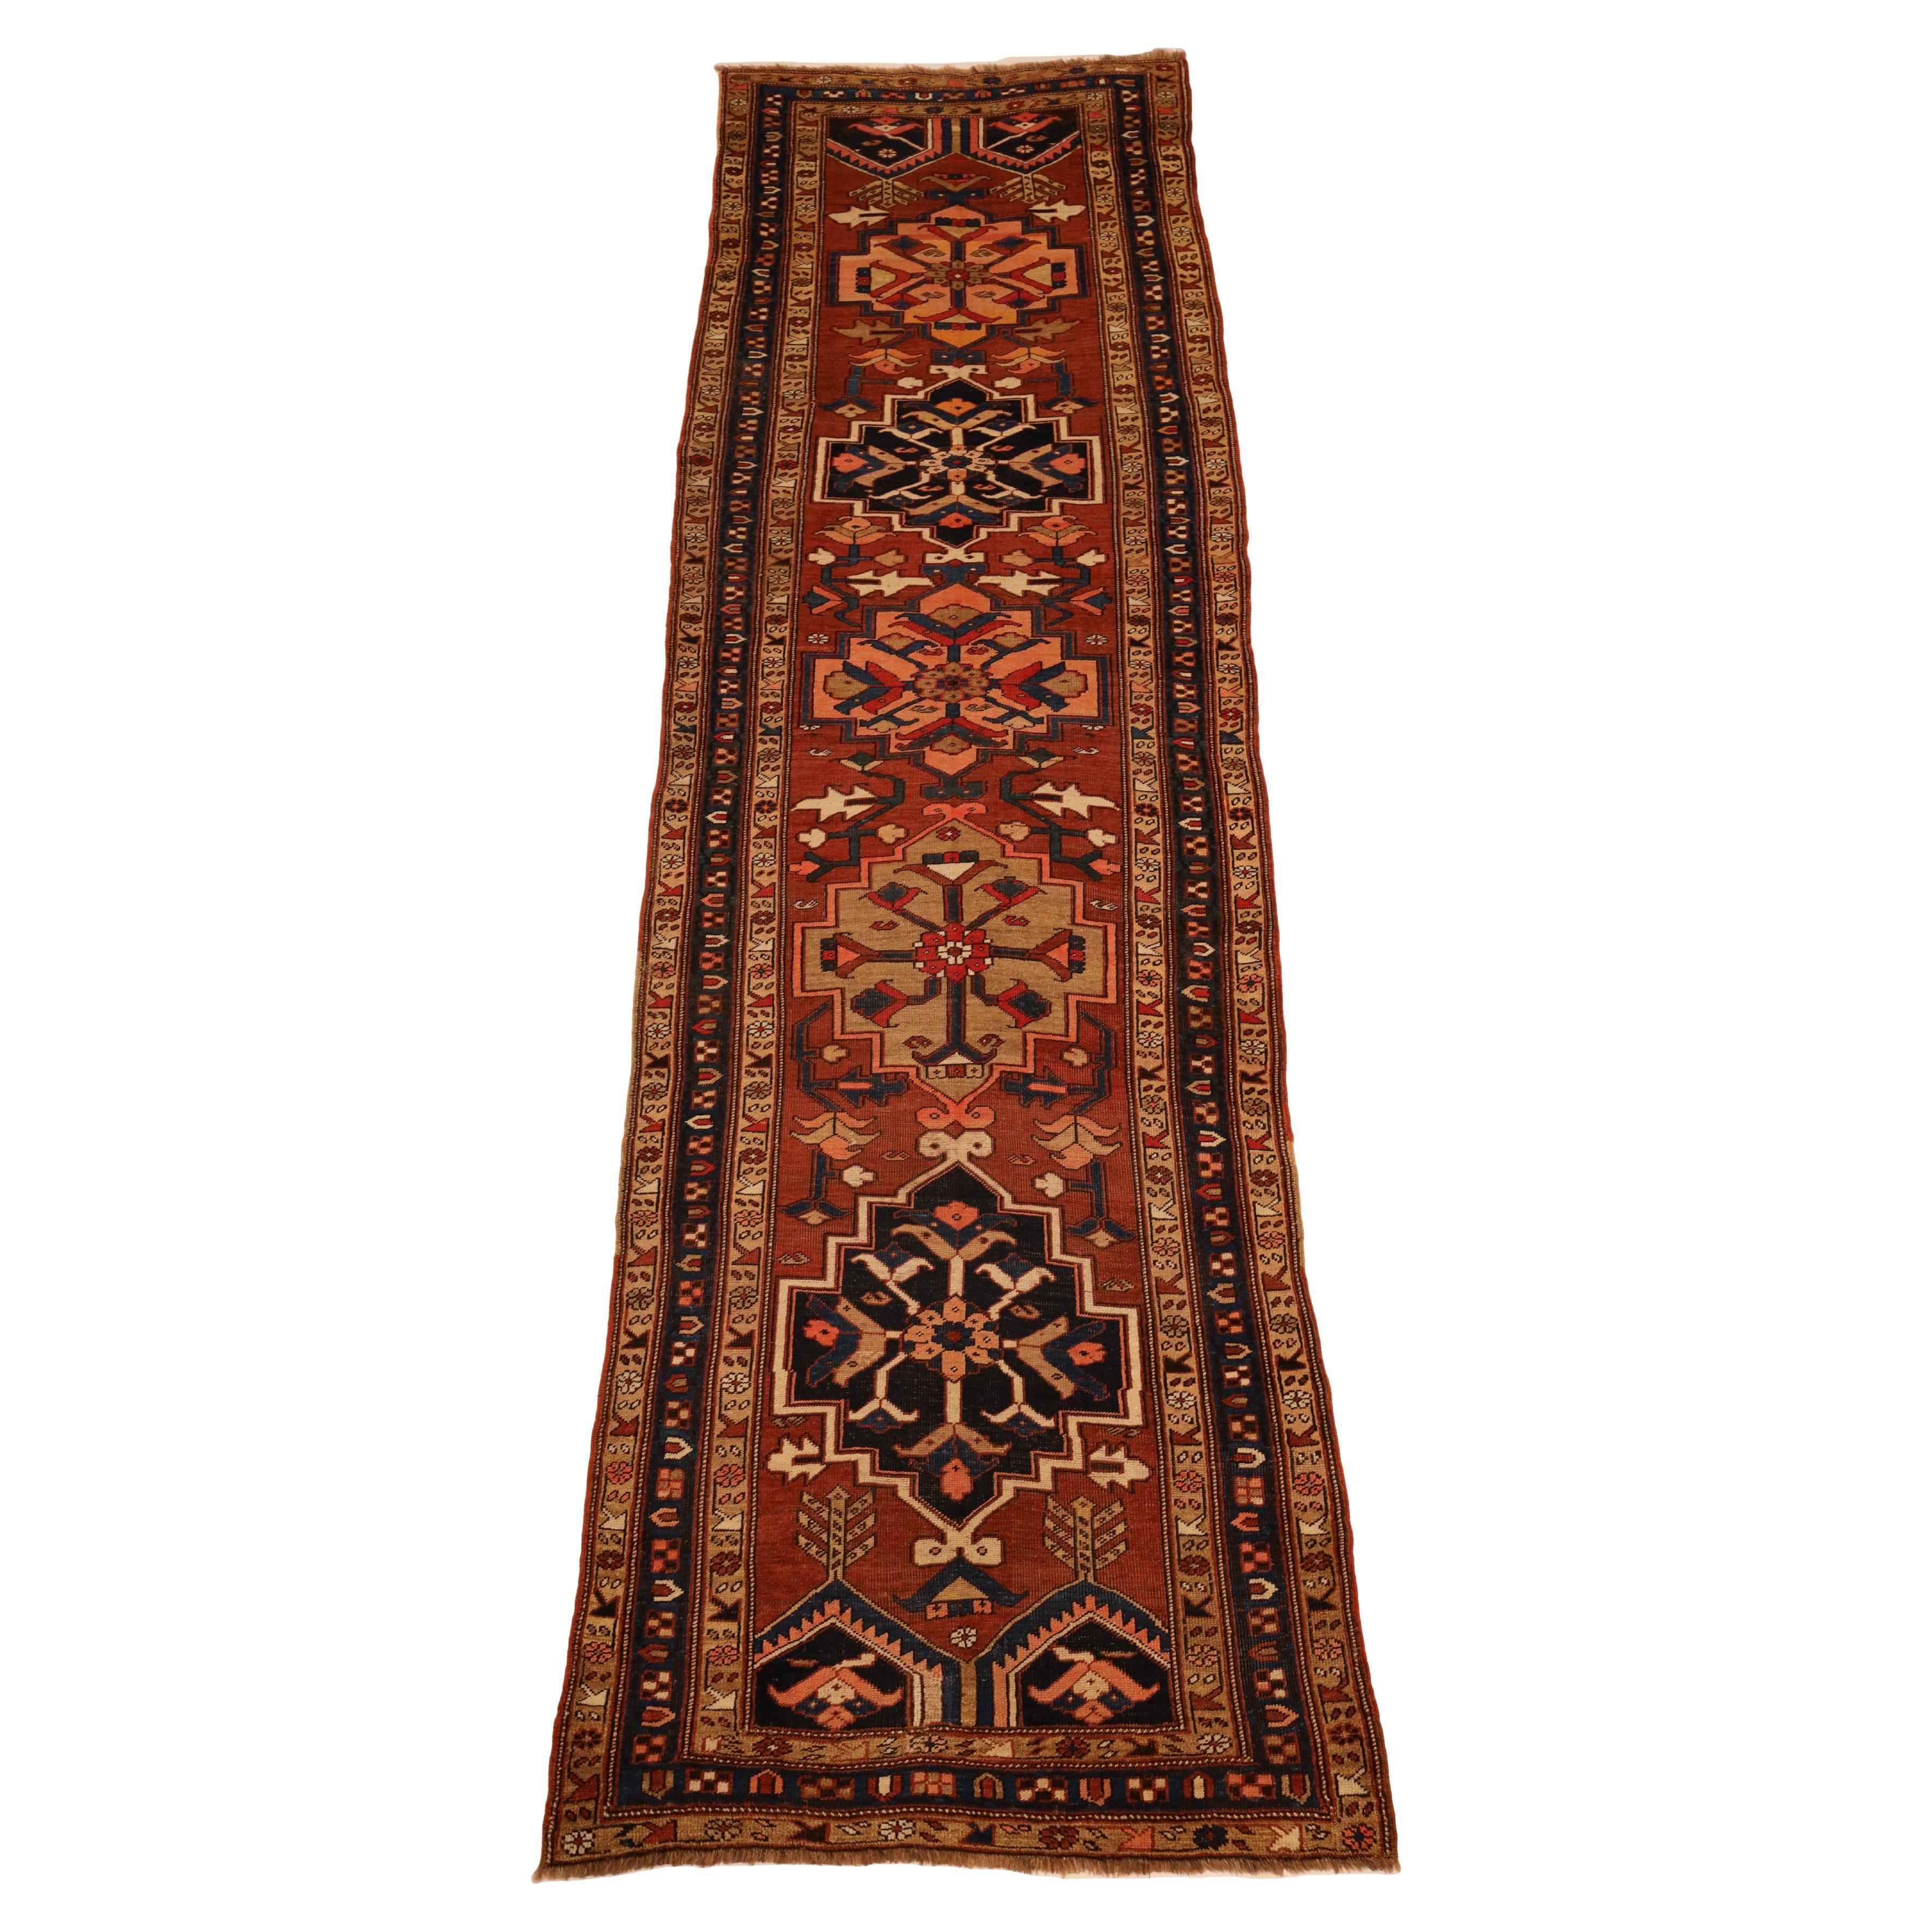 North-West Persian Antique Runner - 4'0" x 13'10" For Sale